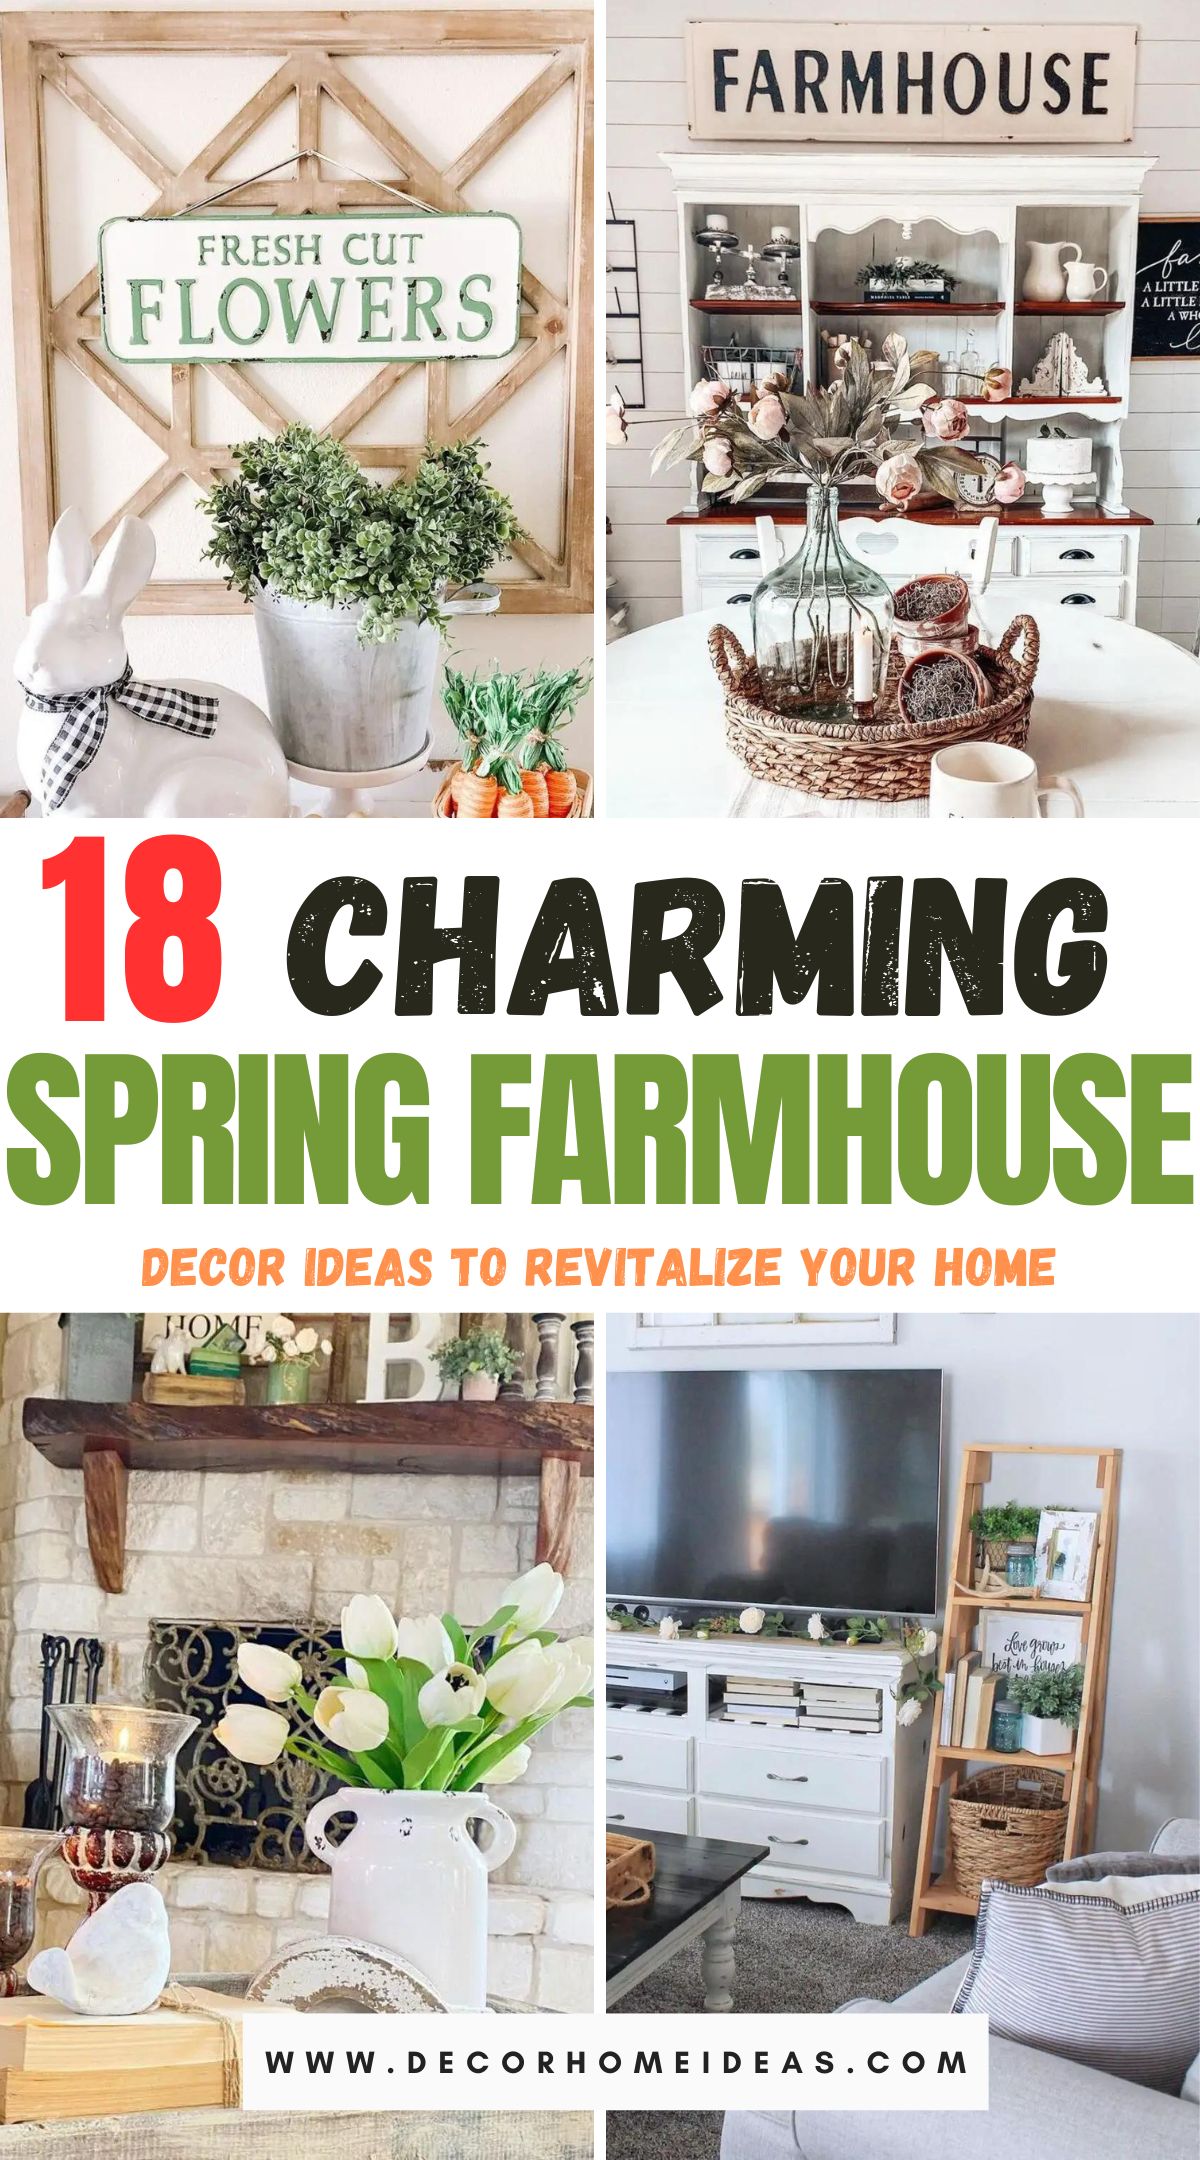 Refresh your home this spring with these 18 farmhouse decor ideas. Explore rustic and charming inspirations that bring a touch of seasonal warmth and style to your living spaces.